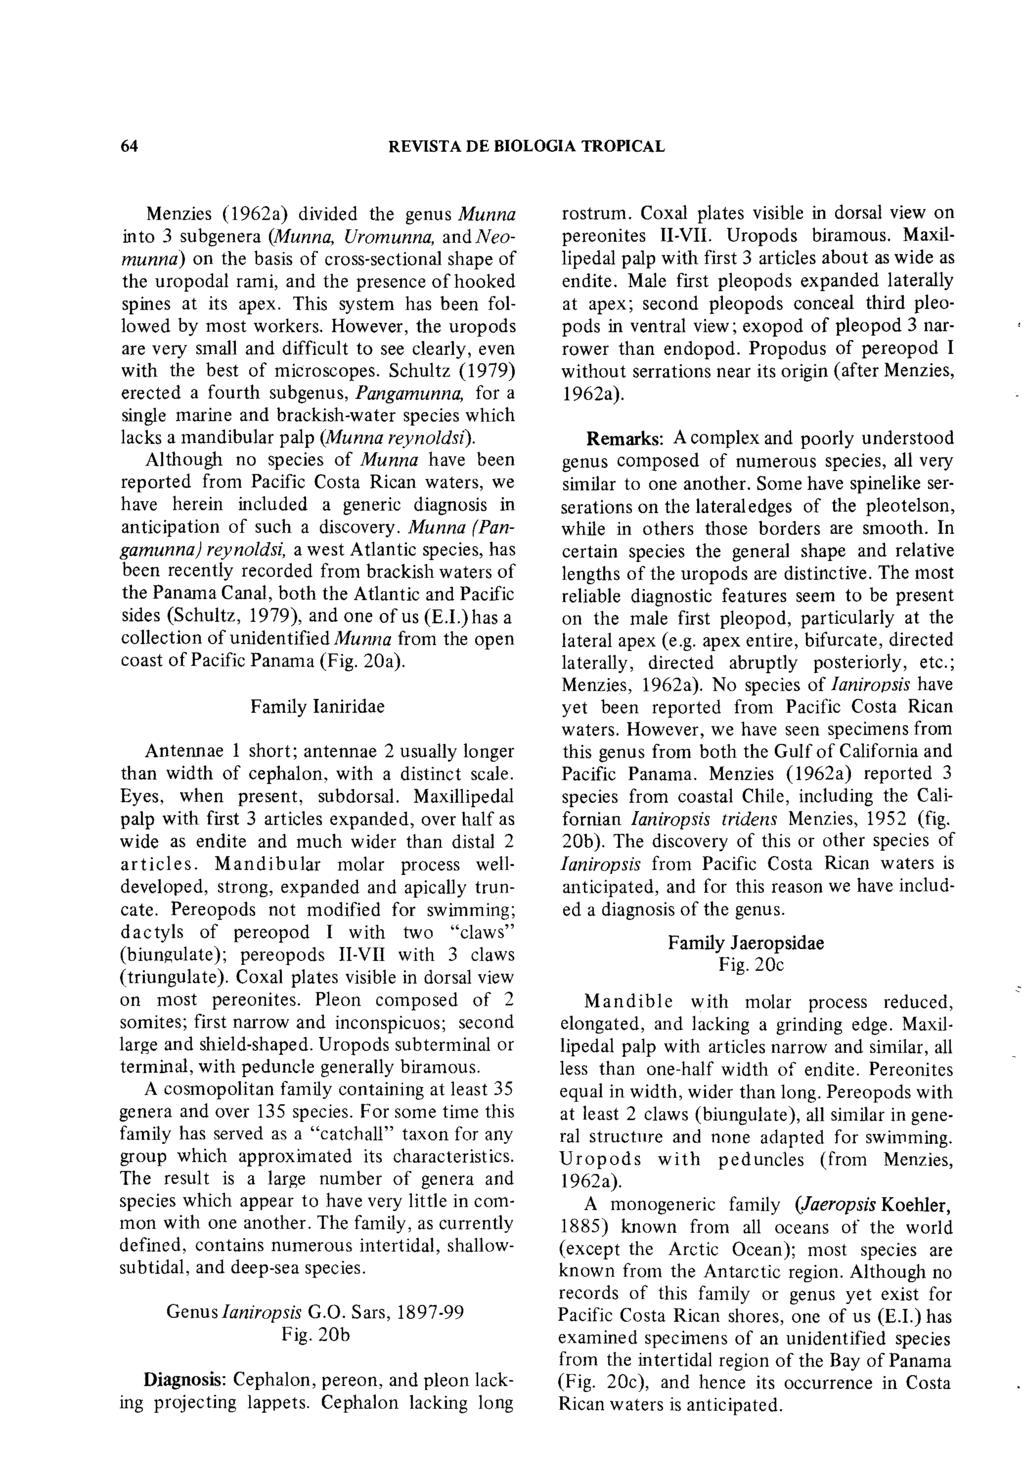 64 REVISTA DE BIOLOGIA TROPICAL Menzies (1962a) divided the genus Munna into 3 subgenera (Munna, Uromunna, andafeomunna) on the basis of cross-sectional shape of the uropodal rami, and the presence